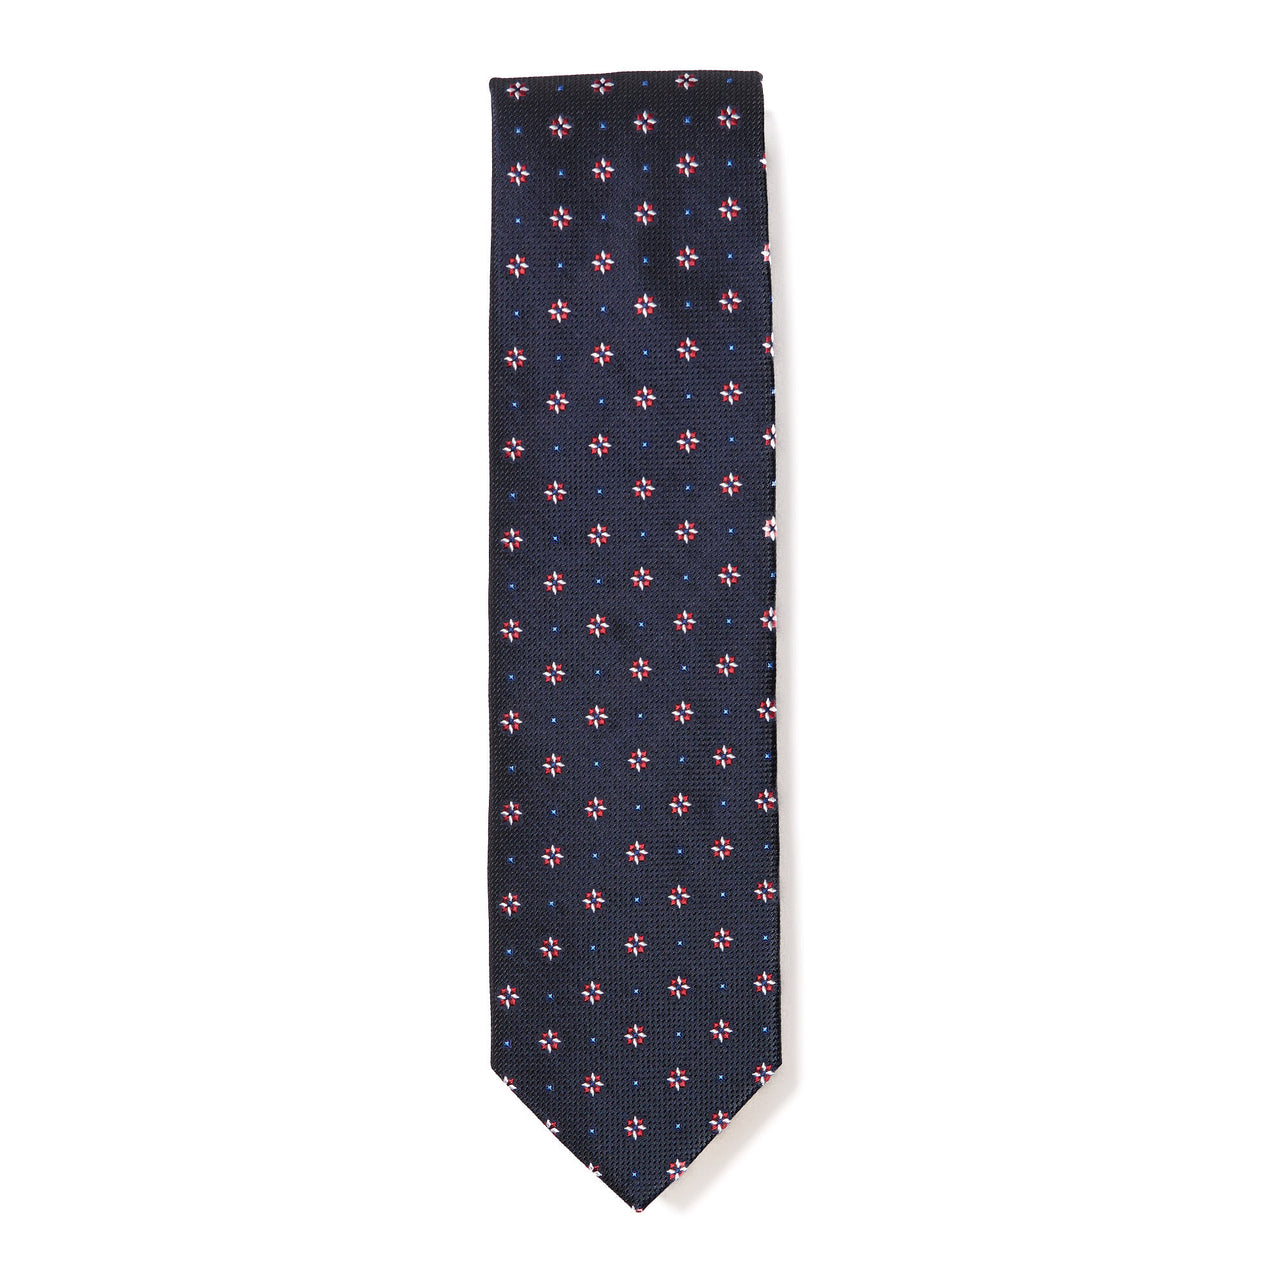 HENRY SARTORIAL X CANTINI Woven Silk Tie BLACK/RED